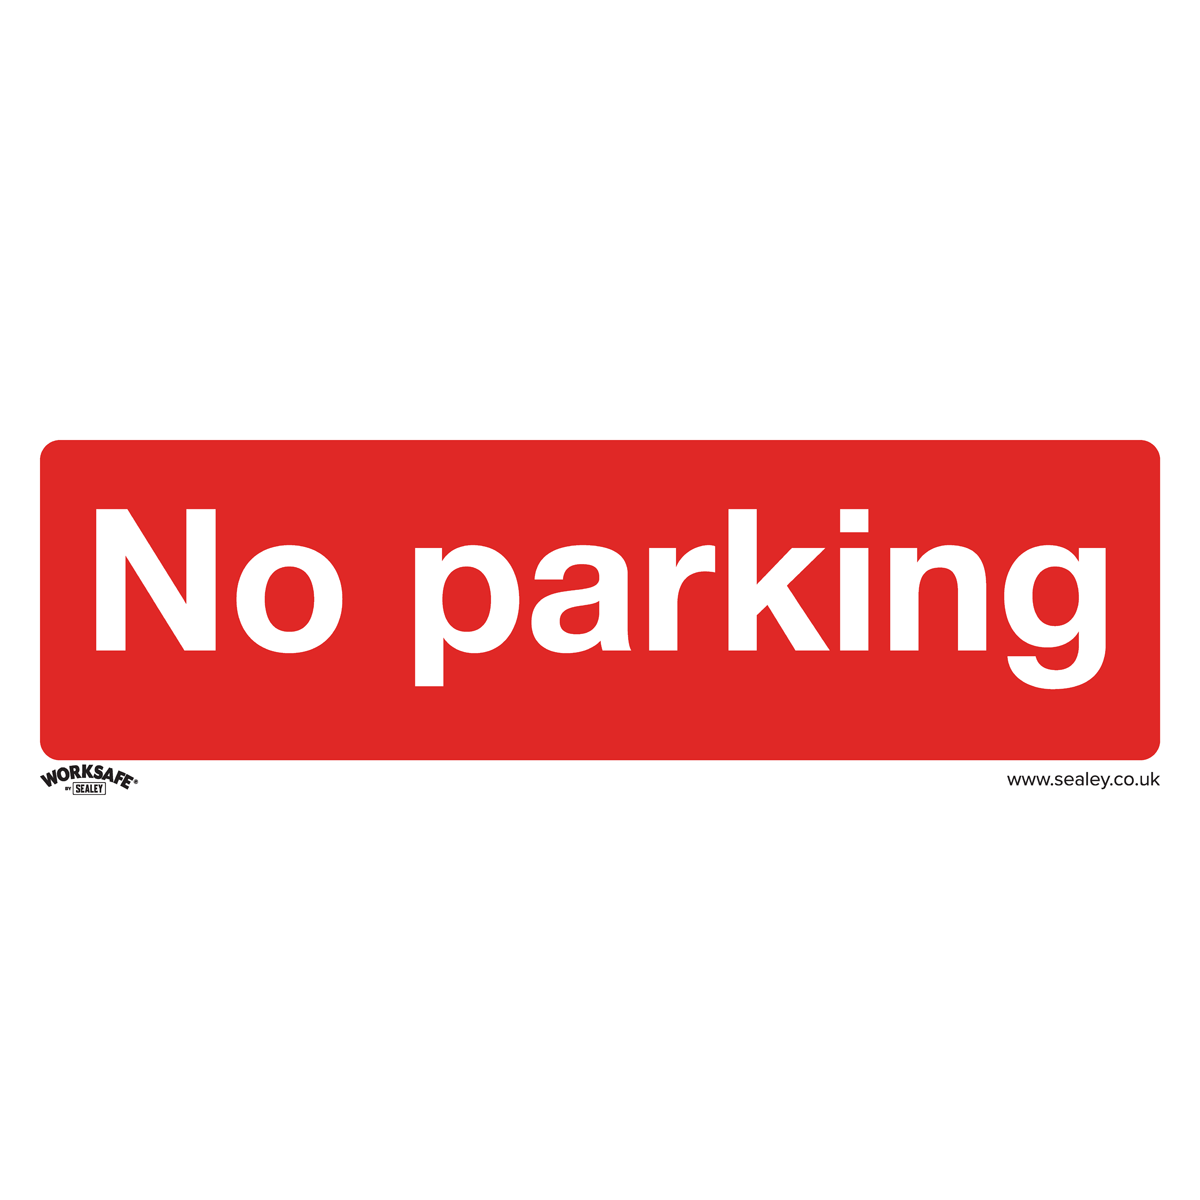 Sealey Prohibition Safety Sign - No Parking - Rigid Plastic - Pack of 10